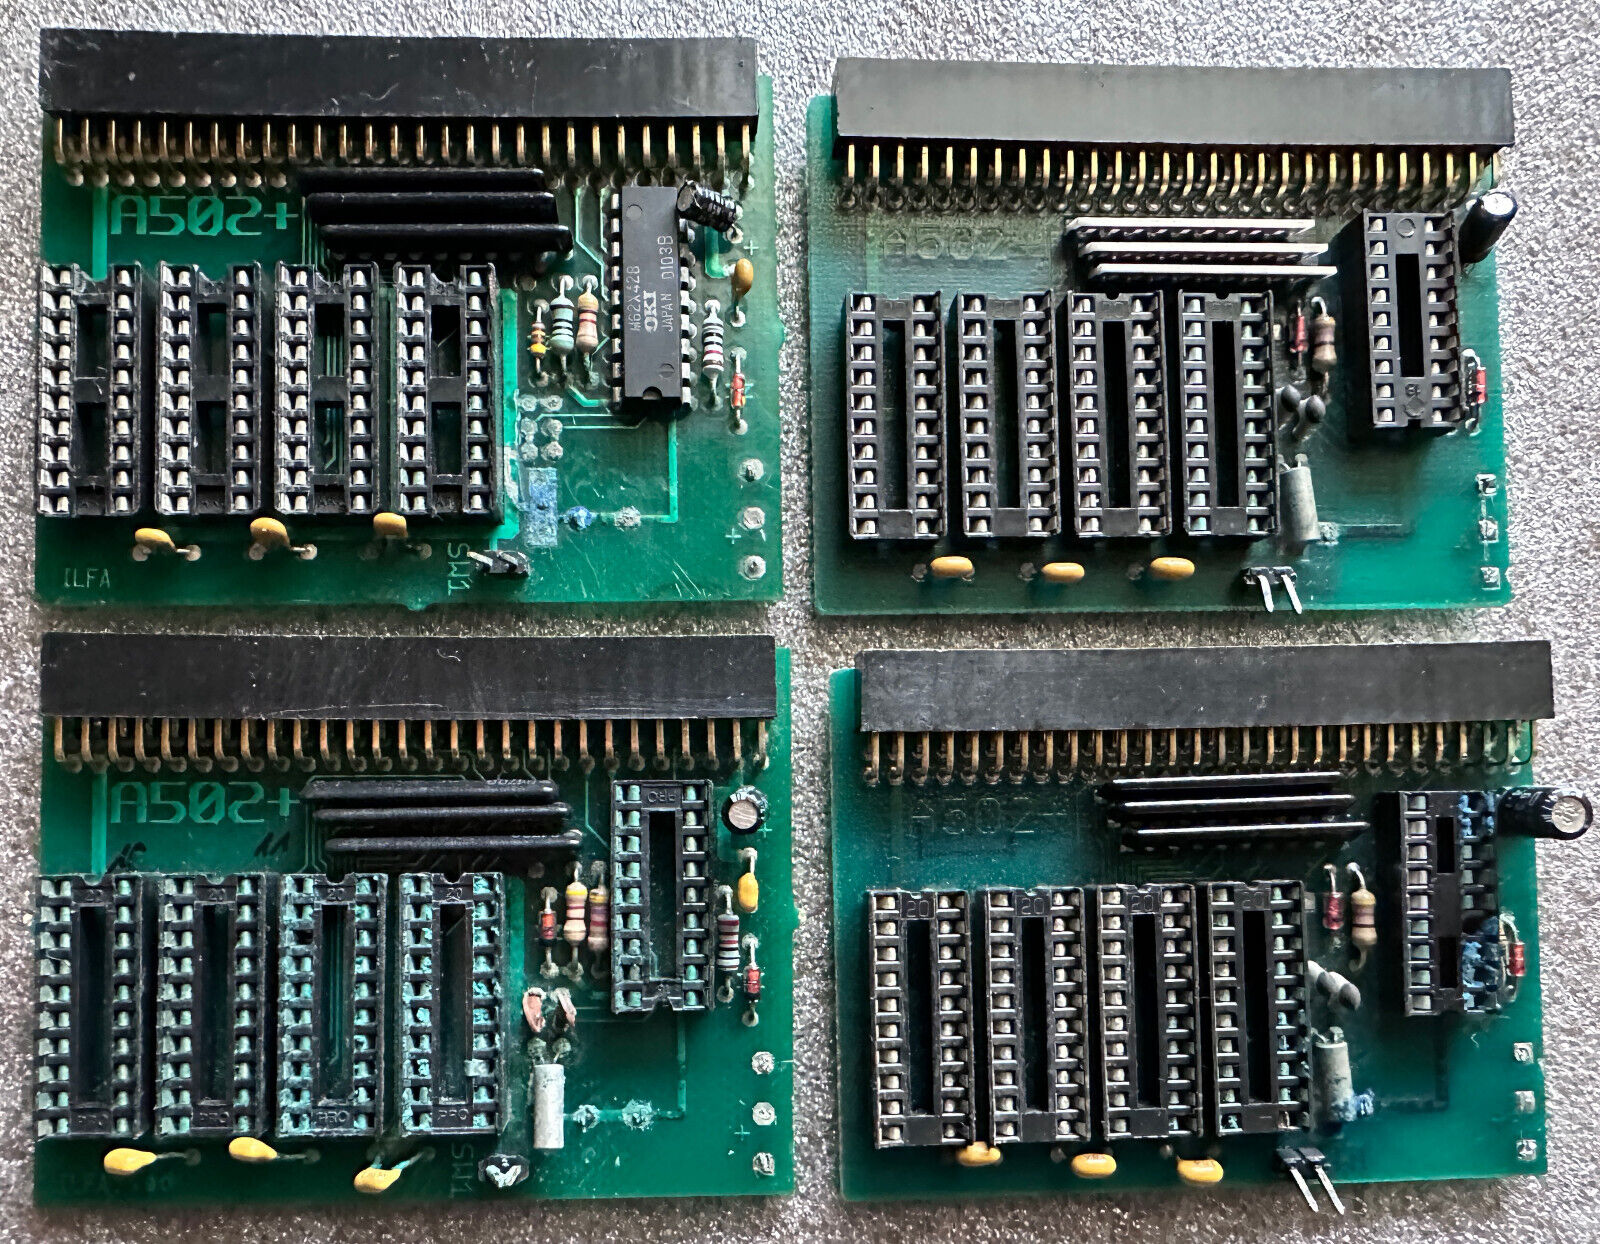 A502+ (4x) Storage Expansion for Amiga 500/A500 Defective, Without Storage